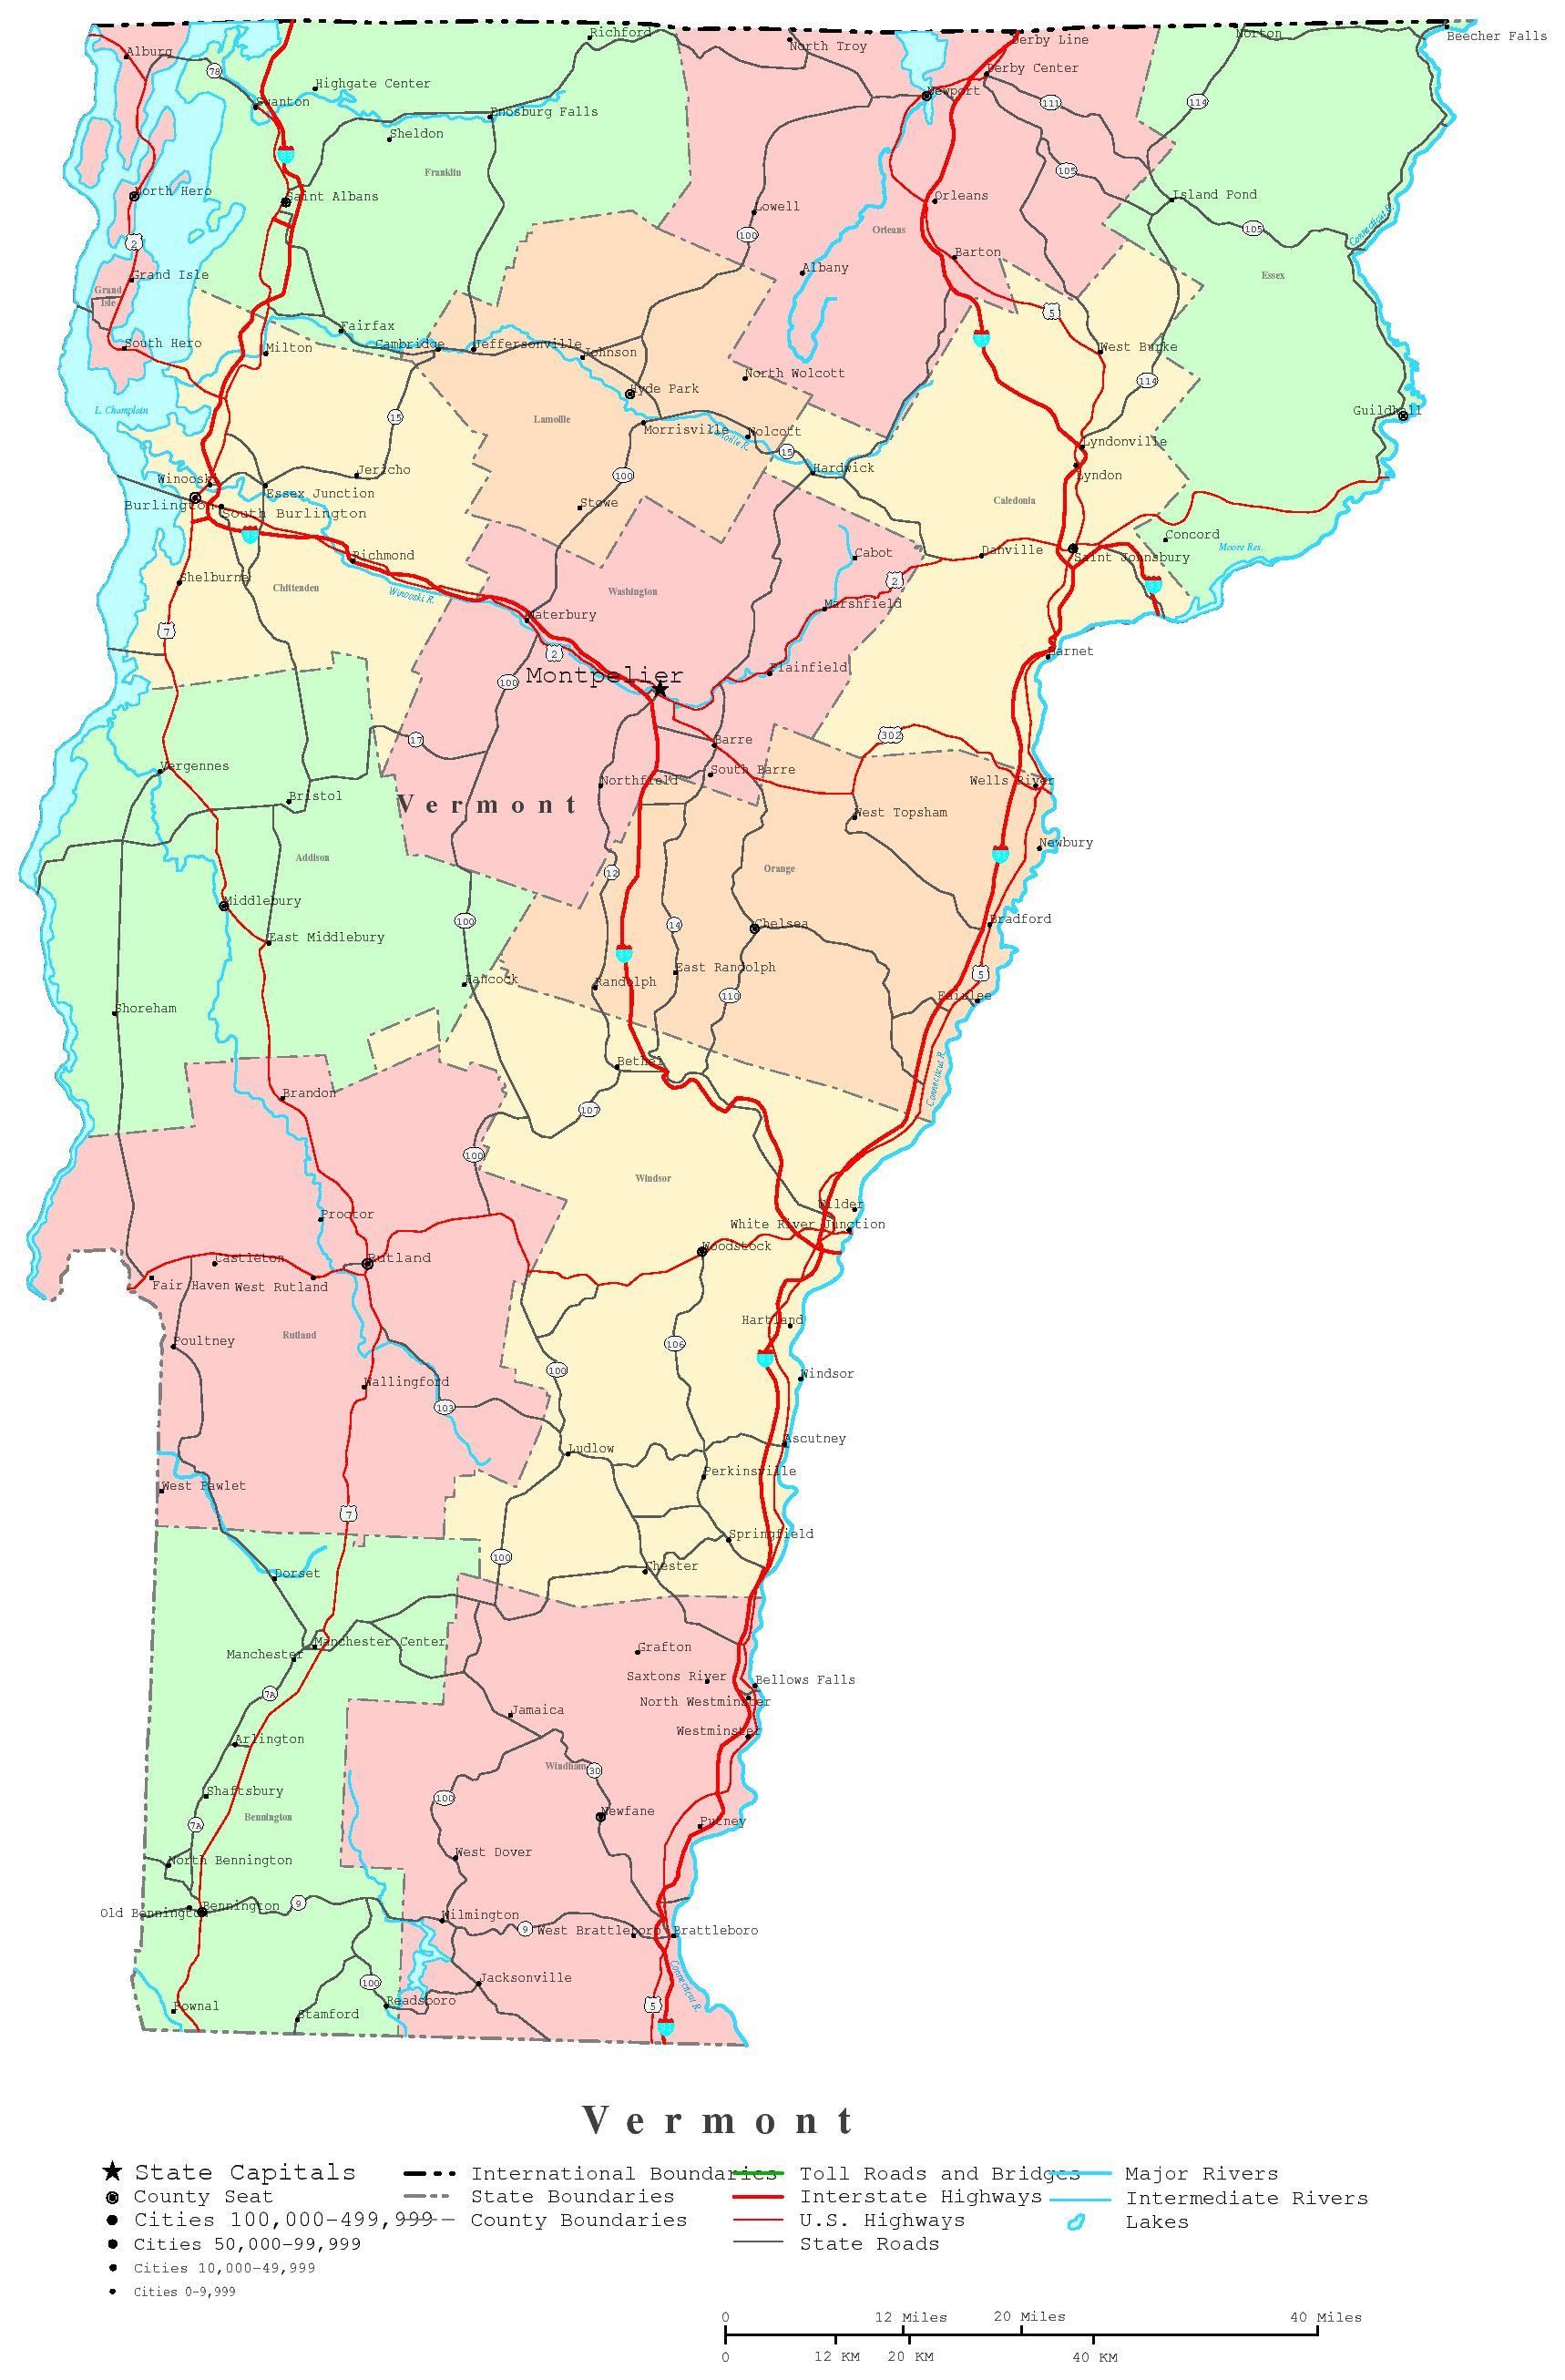 Vermont Map Rich image and wallpaper